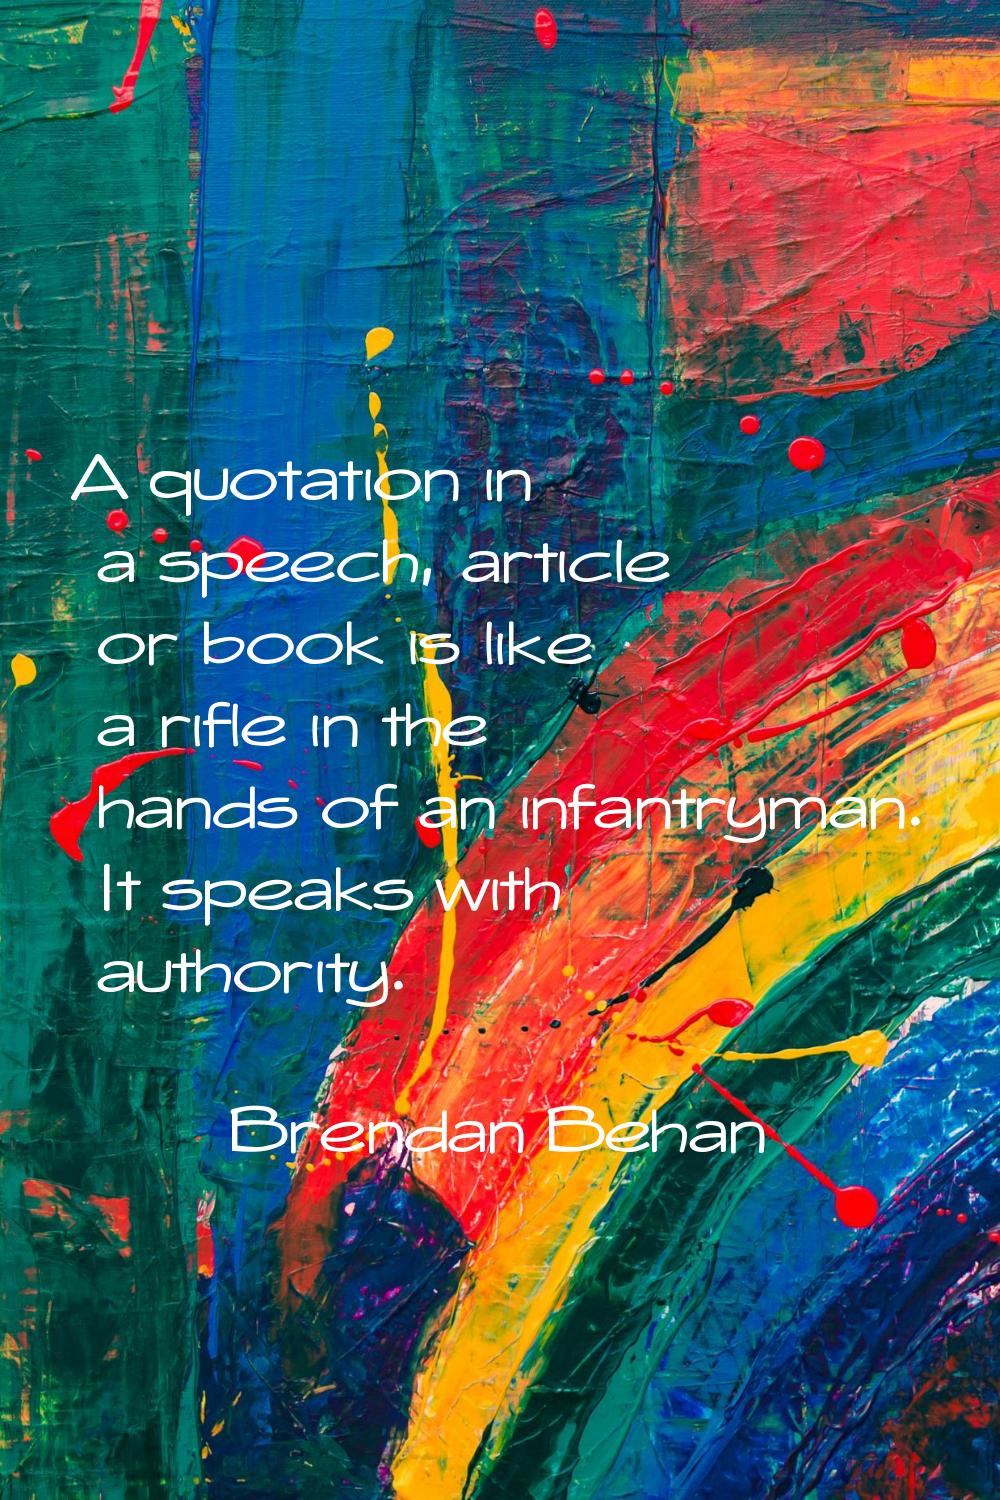 A quotation in a speech, article or book is like a rifle in the hands of an infantryman. It speaks 